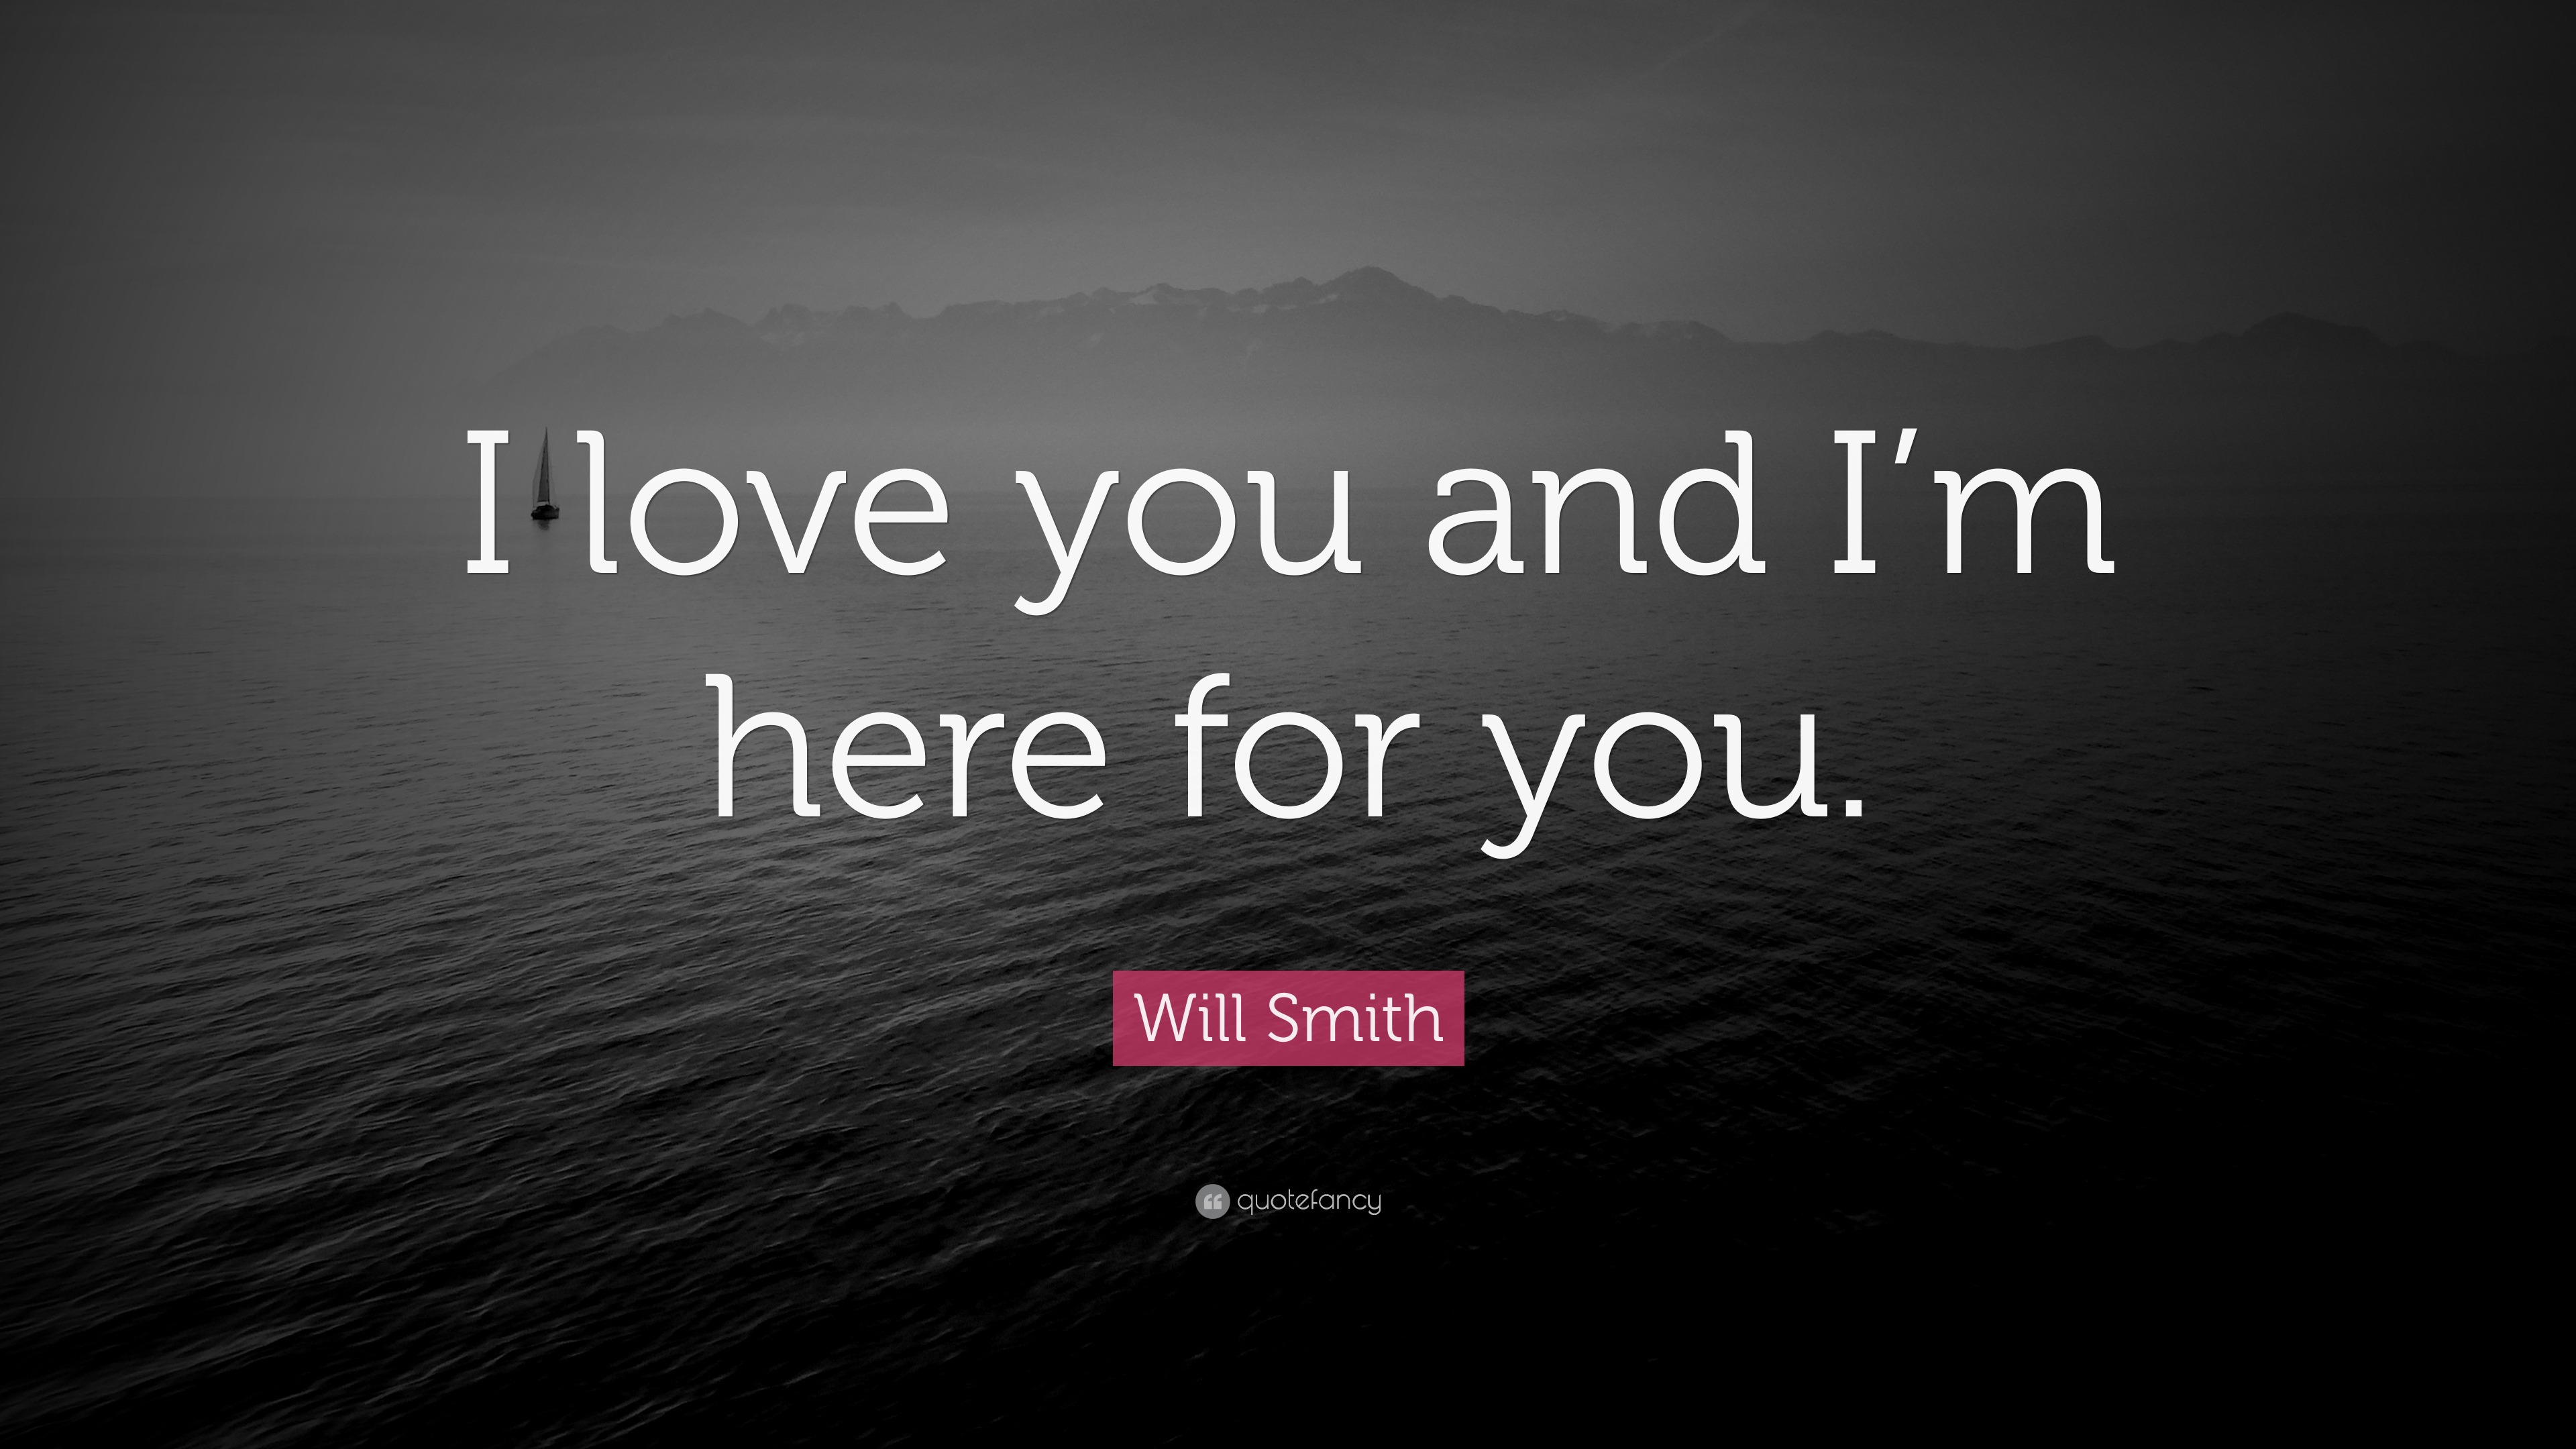 Will Smith Quote “I love you and I’m here for you.” (12